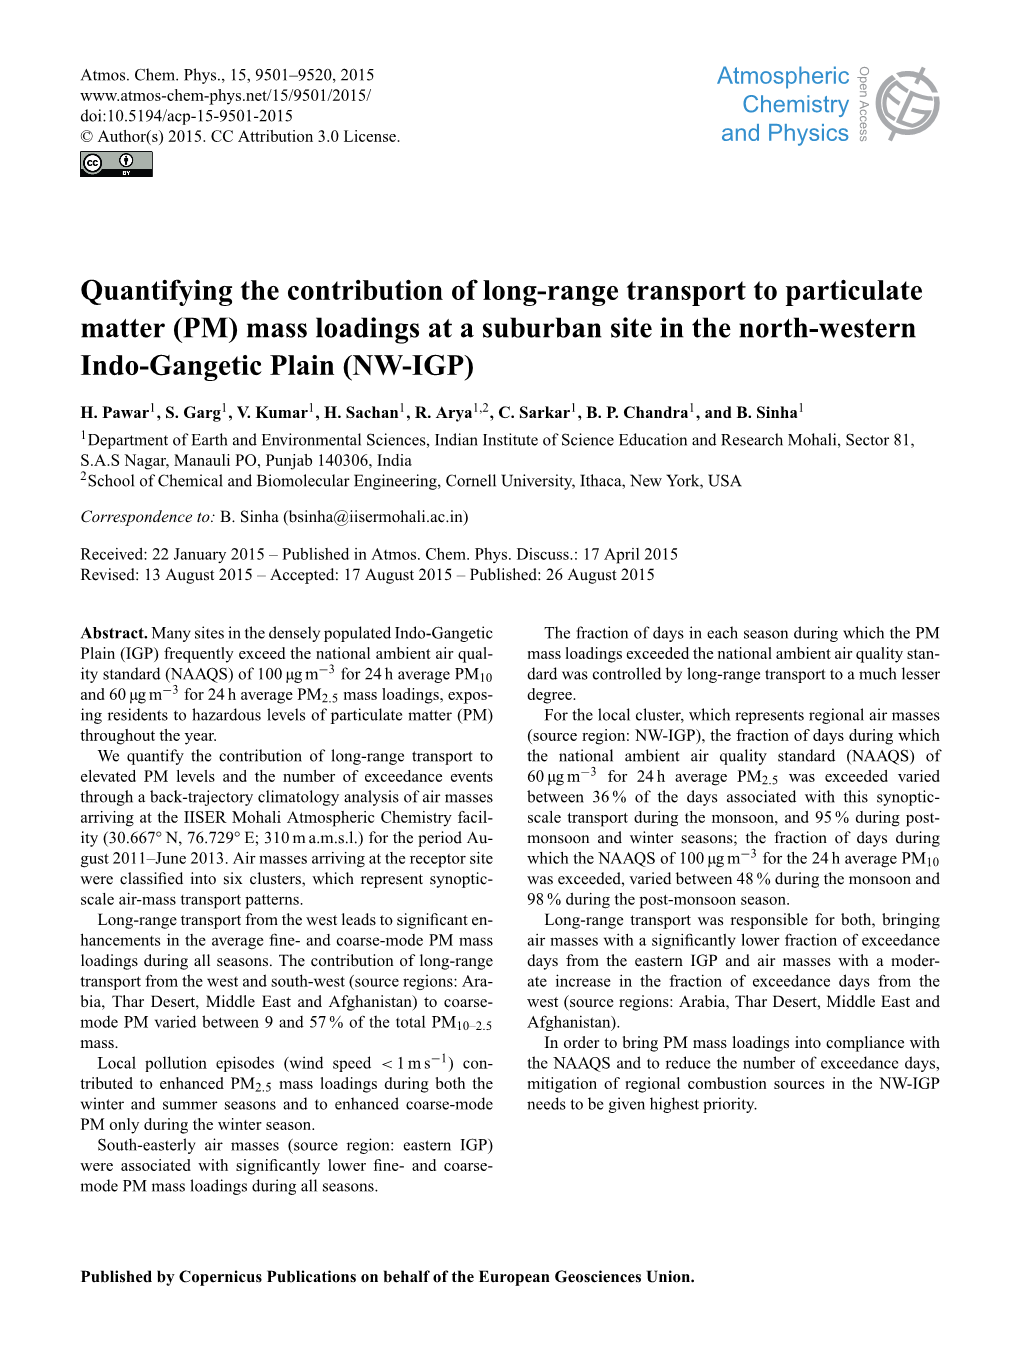 Quantifying the Contribution of Long-Range Transport to Particulate Matter (PM) Mass Loadings at a Suburban Site in the North-Western Indo-Gangetic Plain (NW-IGP)